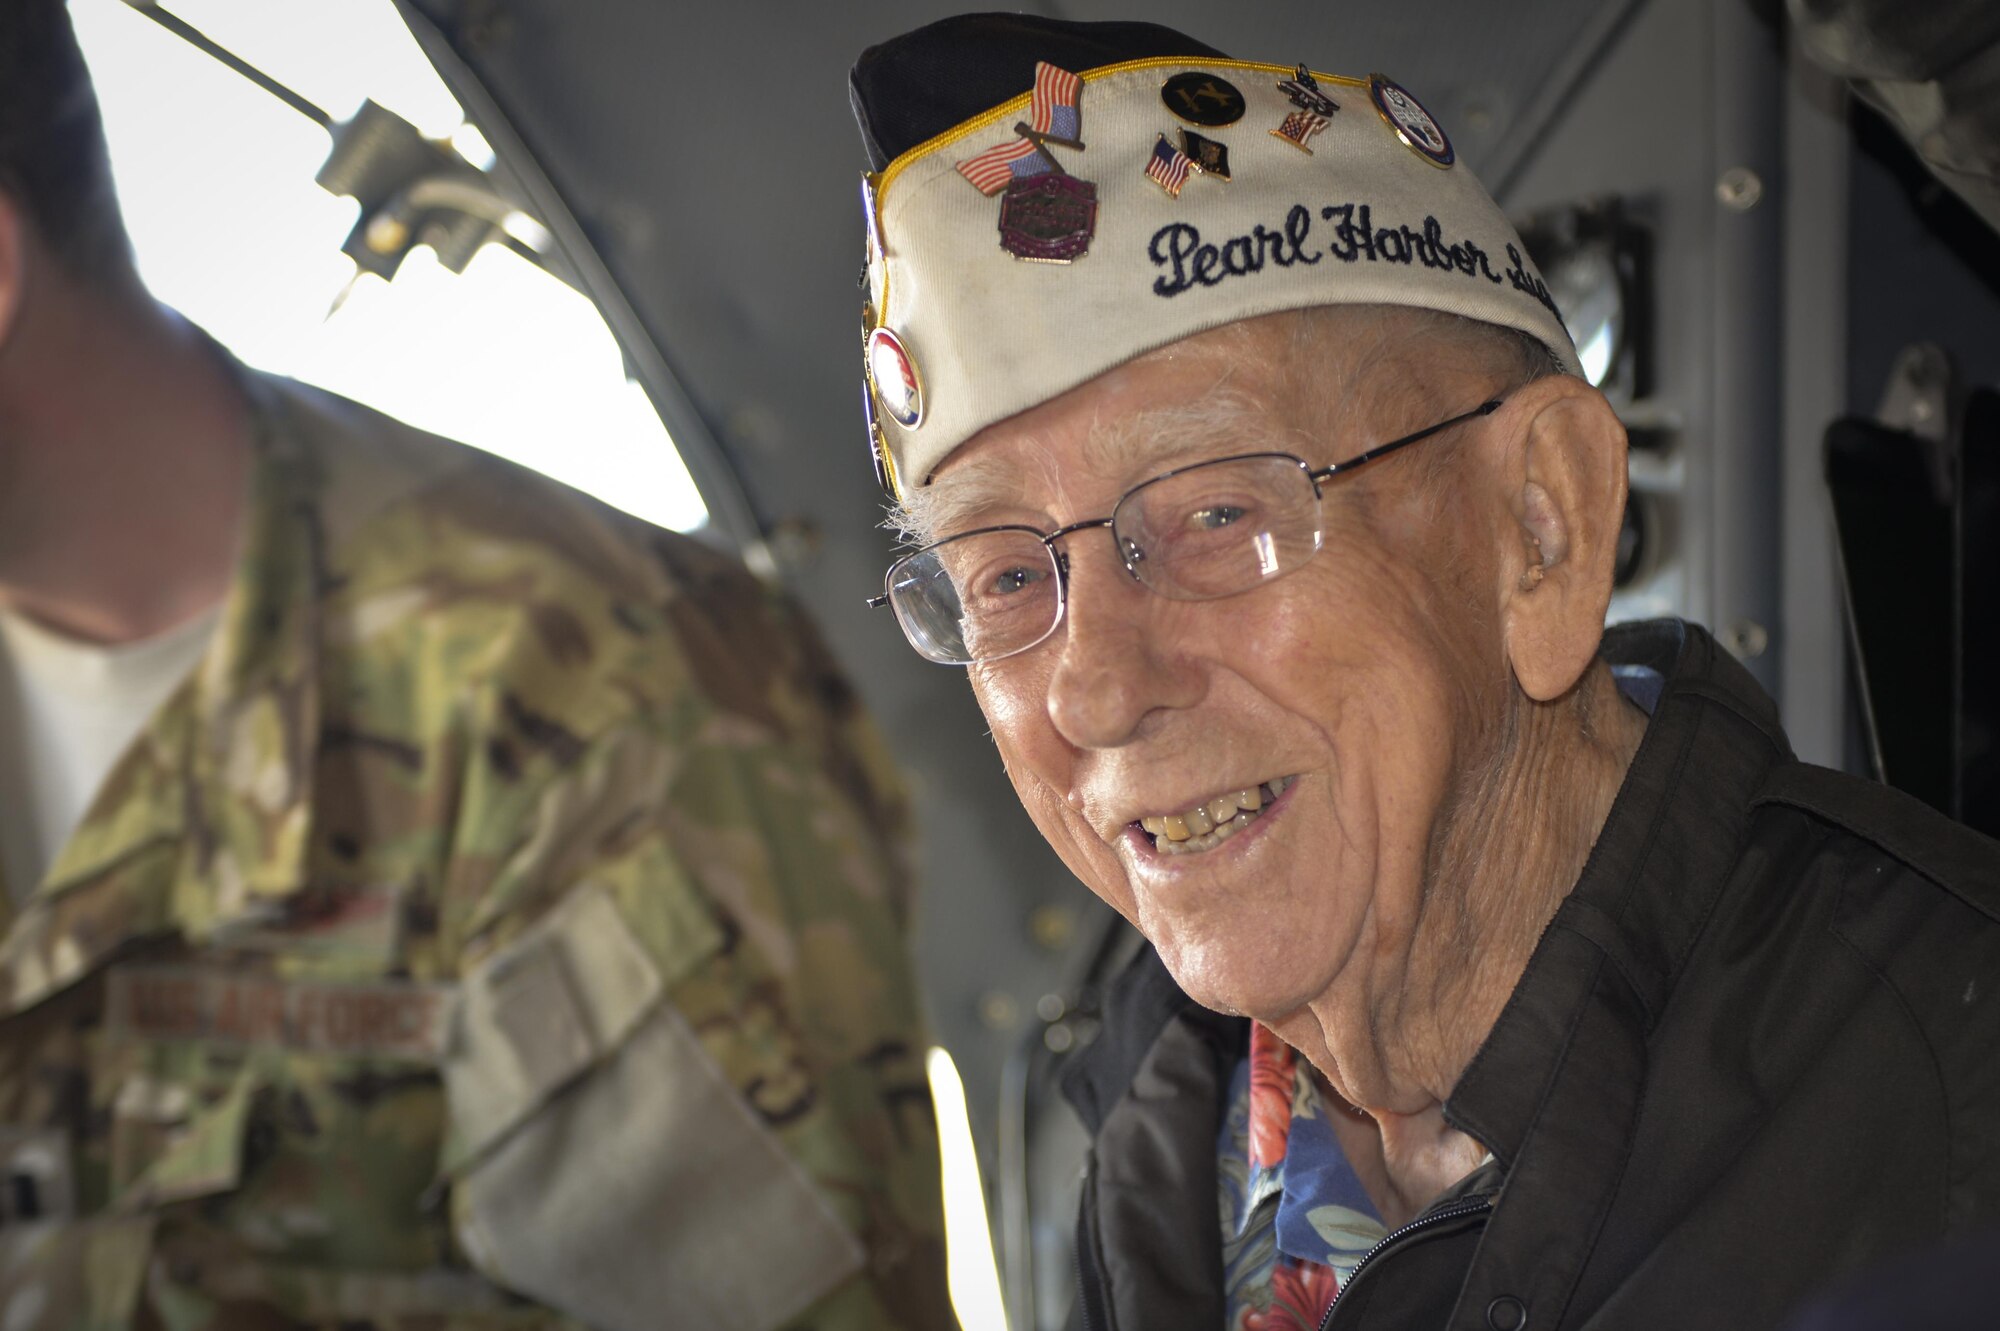 Retired U.S Navy Chief Petty Officer Jay Carraway, a Pearl Harbor survivor, listens to an AC-130U Spooky Gunship capabilities brief at Hurlburt Field, Fla., April 5, 2016. Carraway was a Signalman Striker aboard the USS Hulbert and manned a gun during the attack on Pearl Harbor. The gun was later credited for shooting down a Japanese torpedo plane. (U.S. Air Force photo by 2nd Lt. Jaclyn Pienkowski)